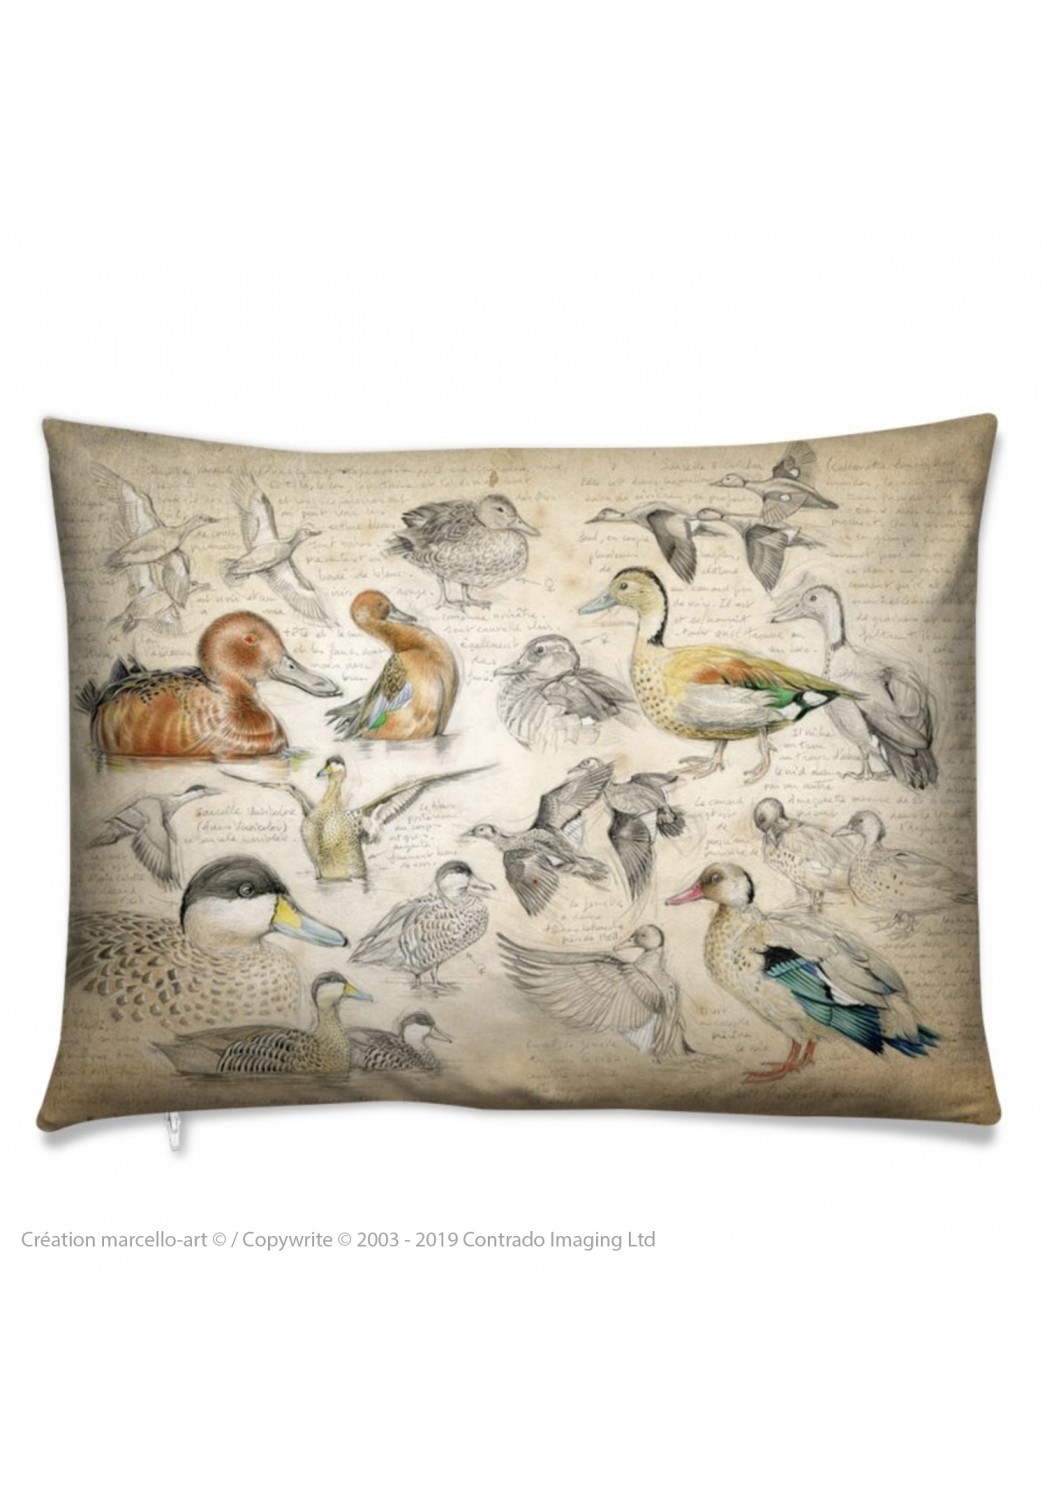 Marcello-art: Fashion accessory Cushion 239 Cinnamon teal, from Brazil, spotted and versicolor